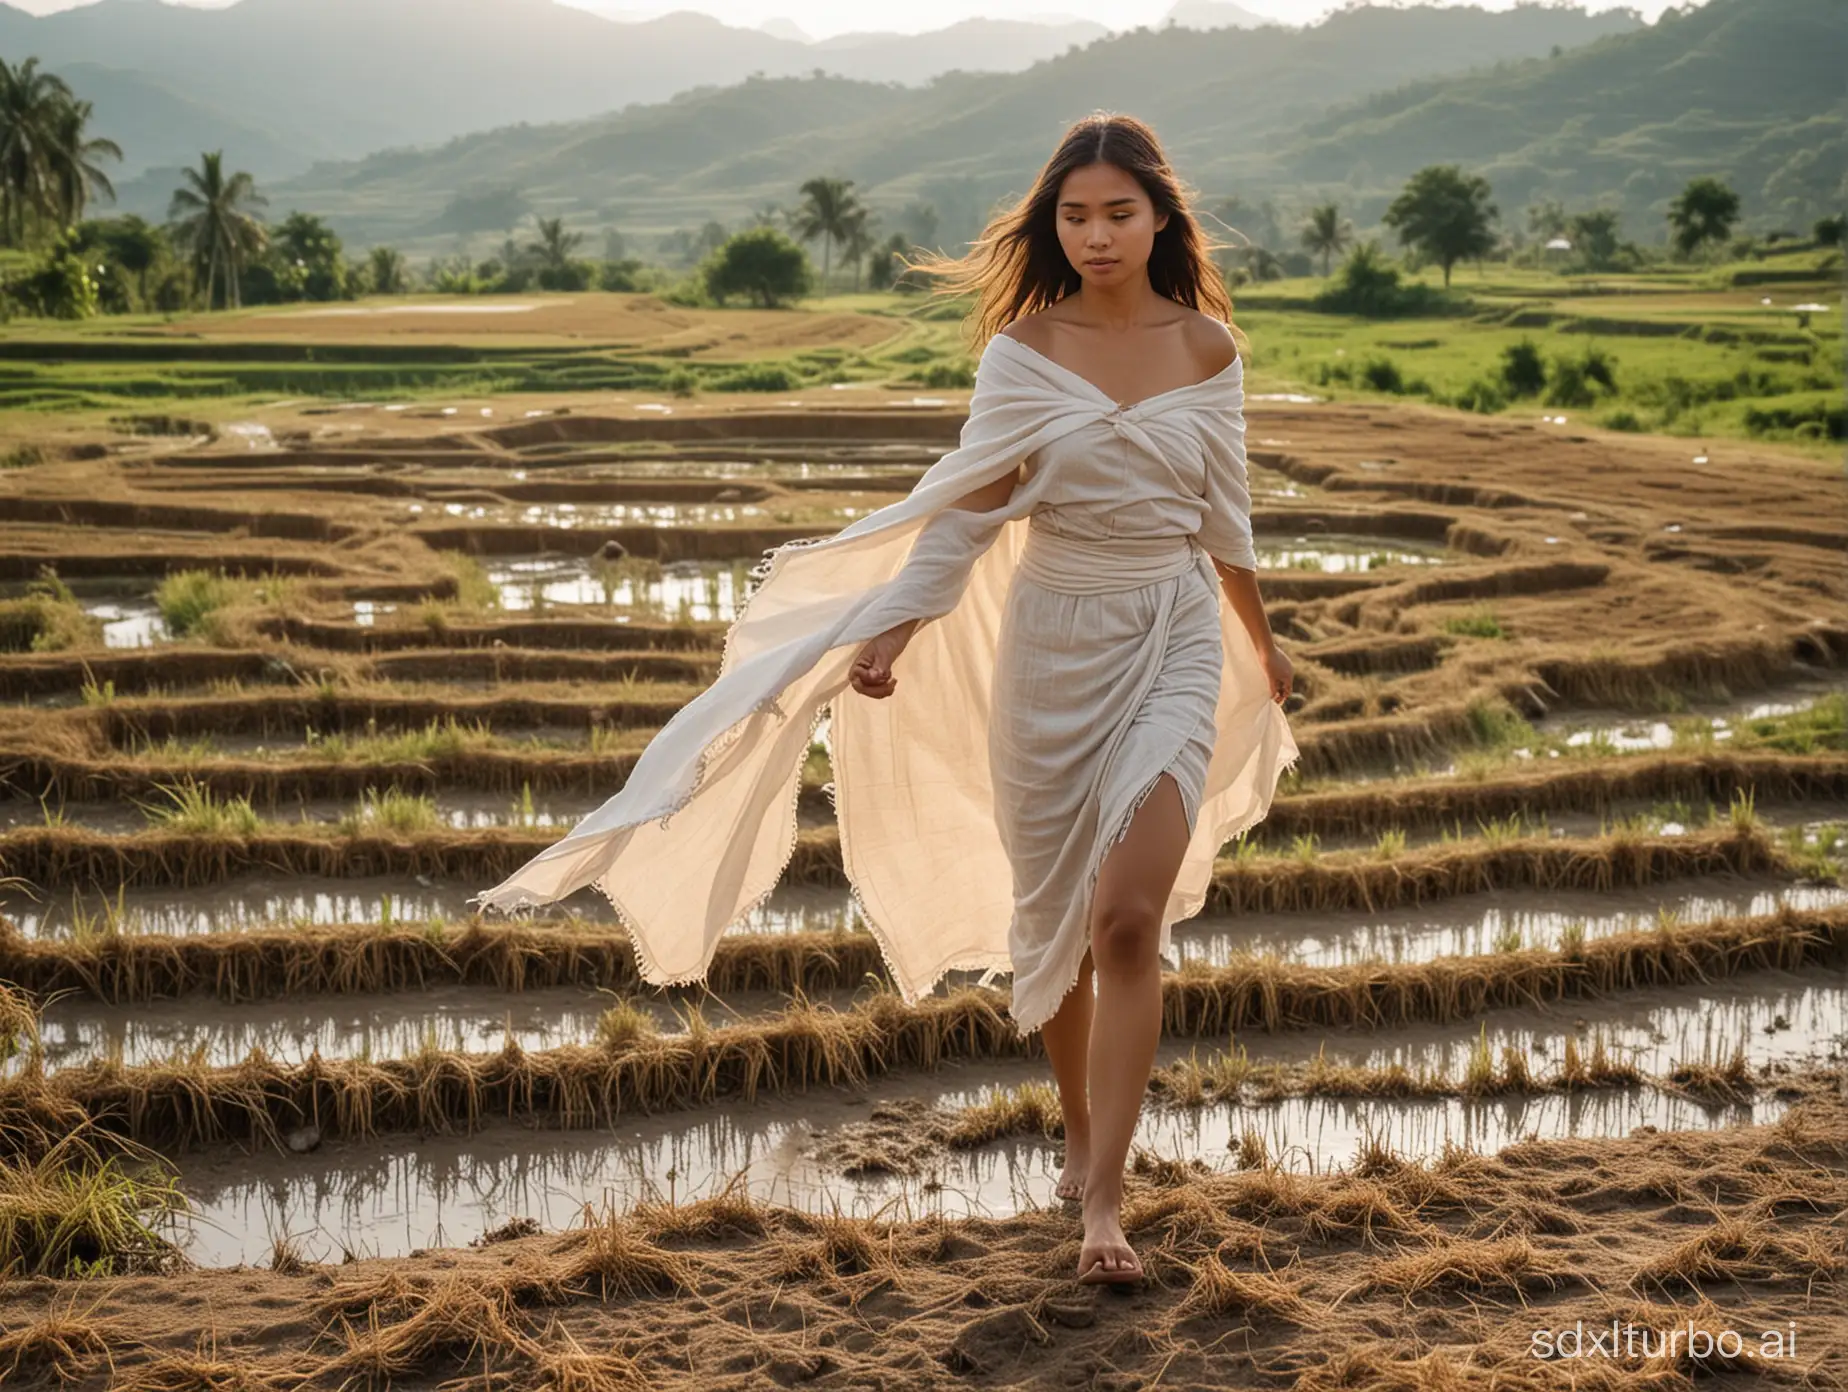 Filipina woman walking on rice field terrace. Medieval time. Revealing. Torn cotton loincloth. Sweating dirty skin. Messy hairs. Hilltop